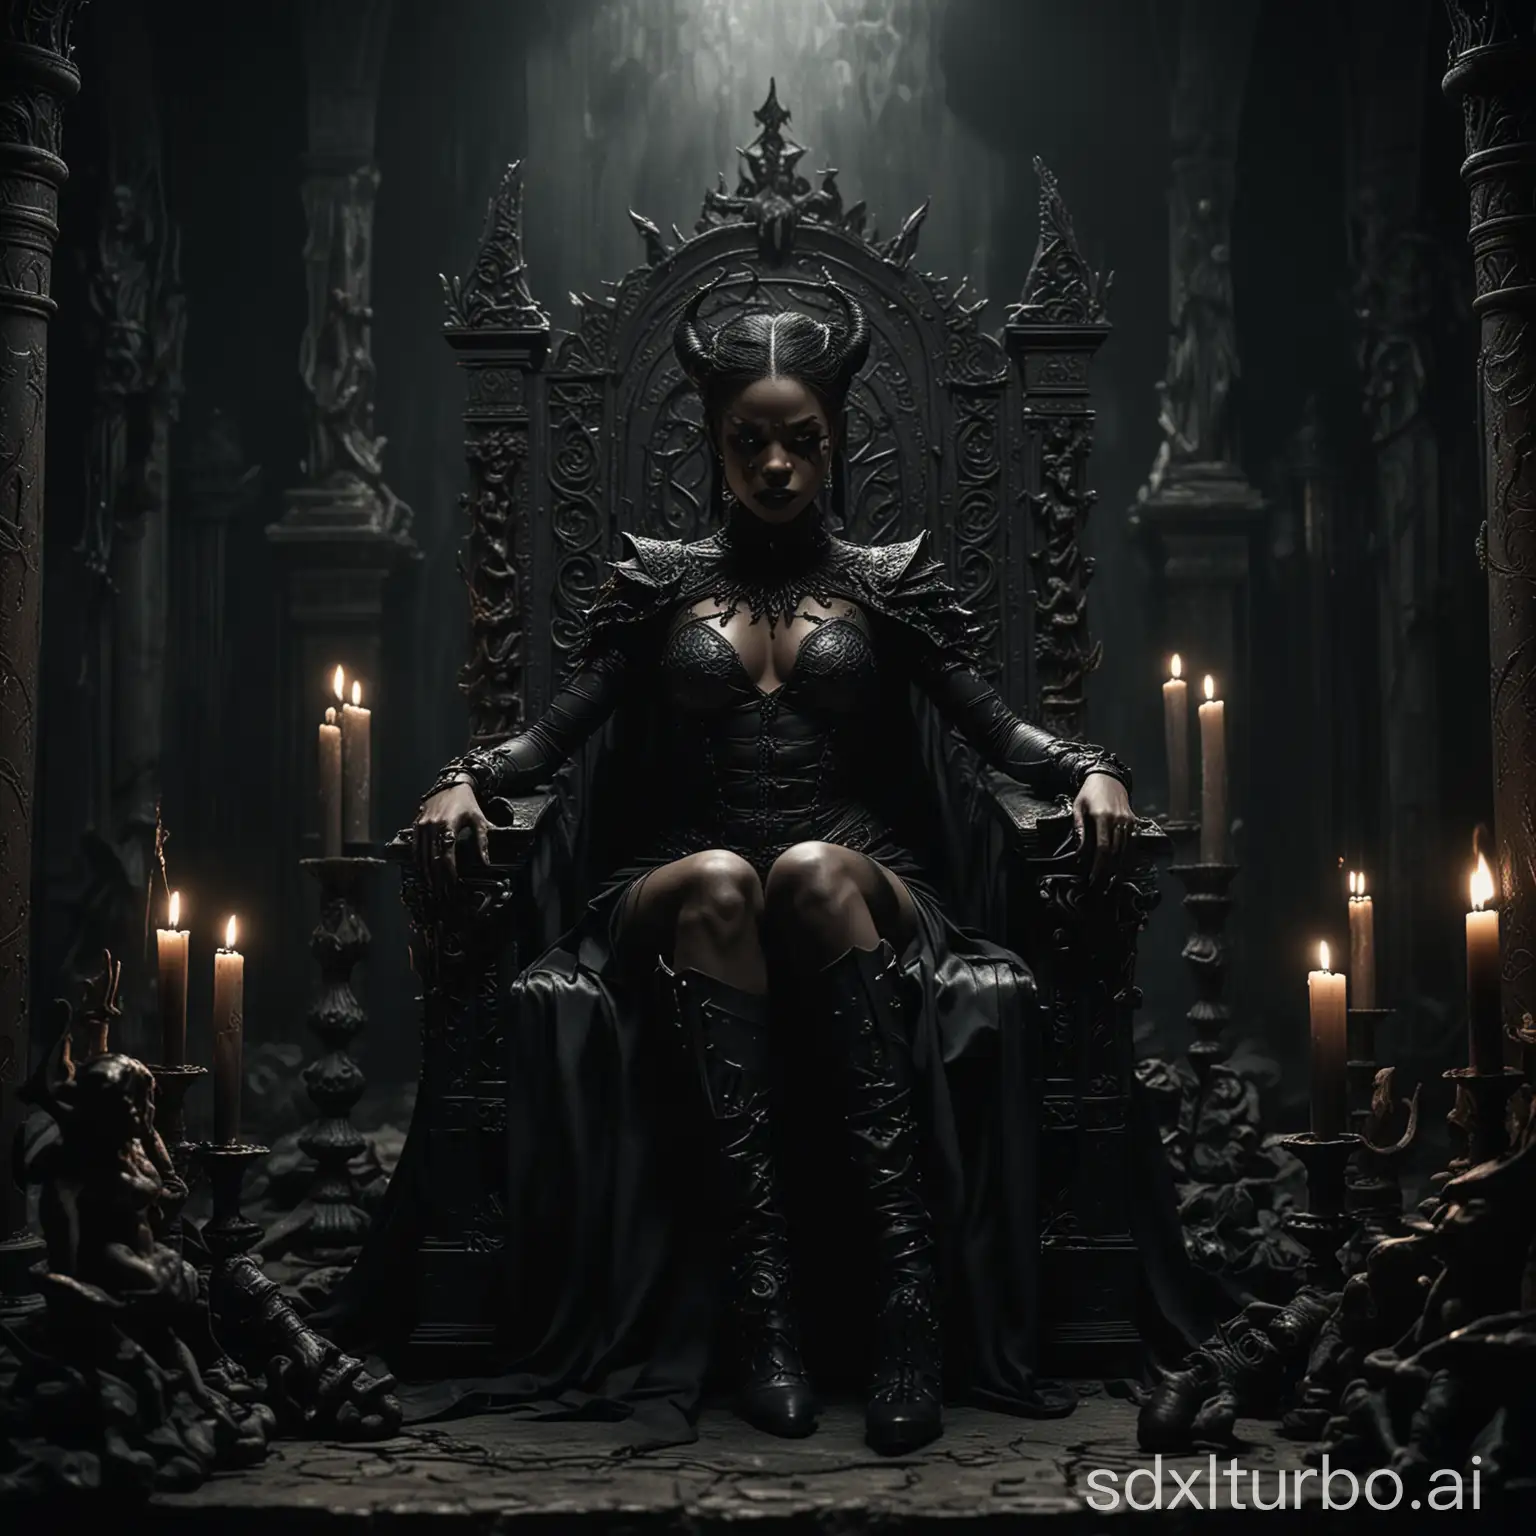 In the depths of an eerie chamber, a captivating high-quality cinematic photo captures a black demon woman , adorned with sinister-looking high-heeled boots, sitting majestically on an intricately carved black throne. Her dark beauty is accentuated by her glowing, which pierces the surrounding darkness. The flickering glow of black candles casts haunting shadows across the chamber, adding to the chilling atmosphere. The demonic woman's poise and commanding presence dominate the scene, exuding an intense power and darkness that leaves an indelible impression on all who behold her., cinematic, photo